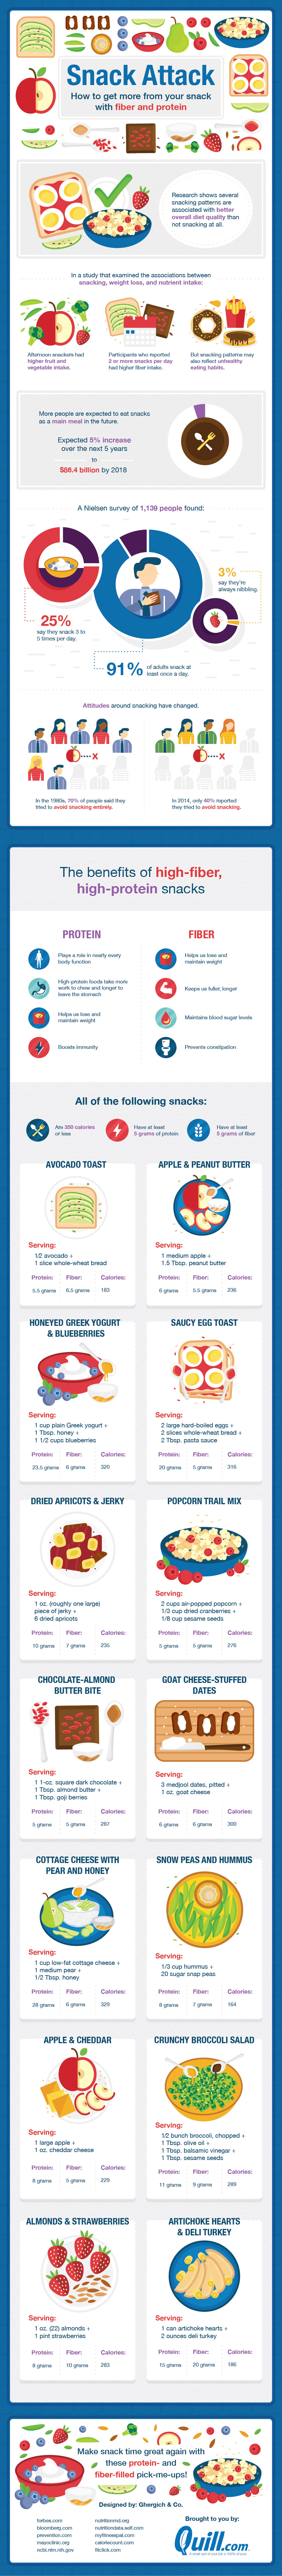 Upgrade Your Snack Game To Get More Fiber and Protein Infographic